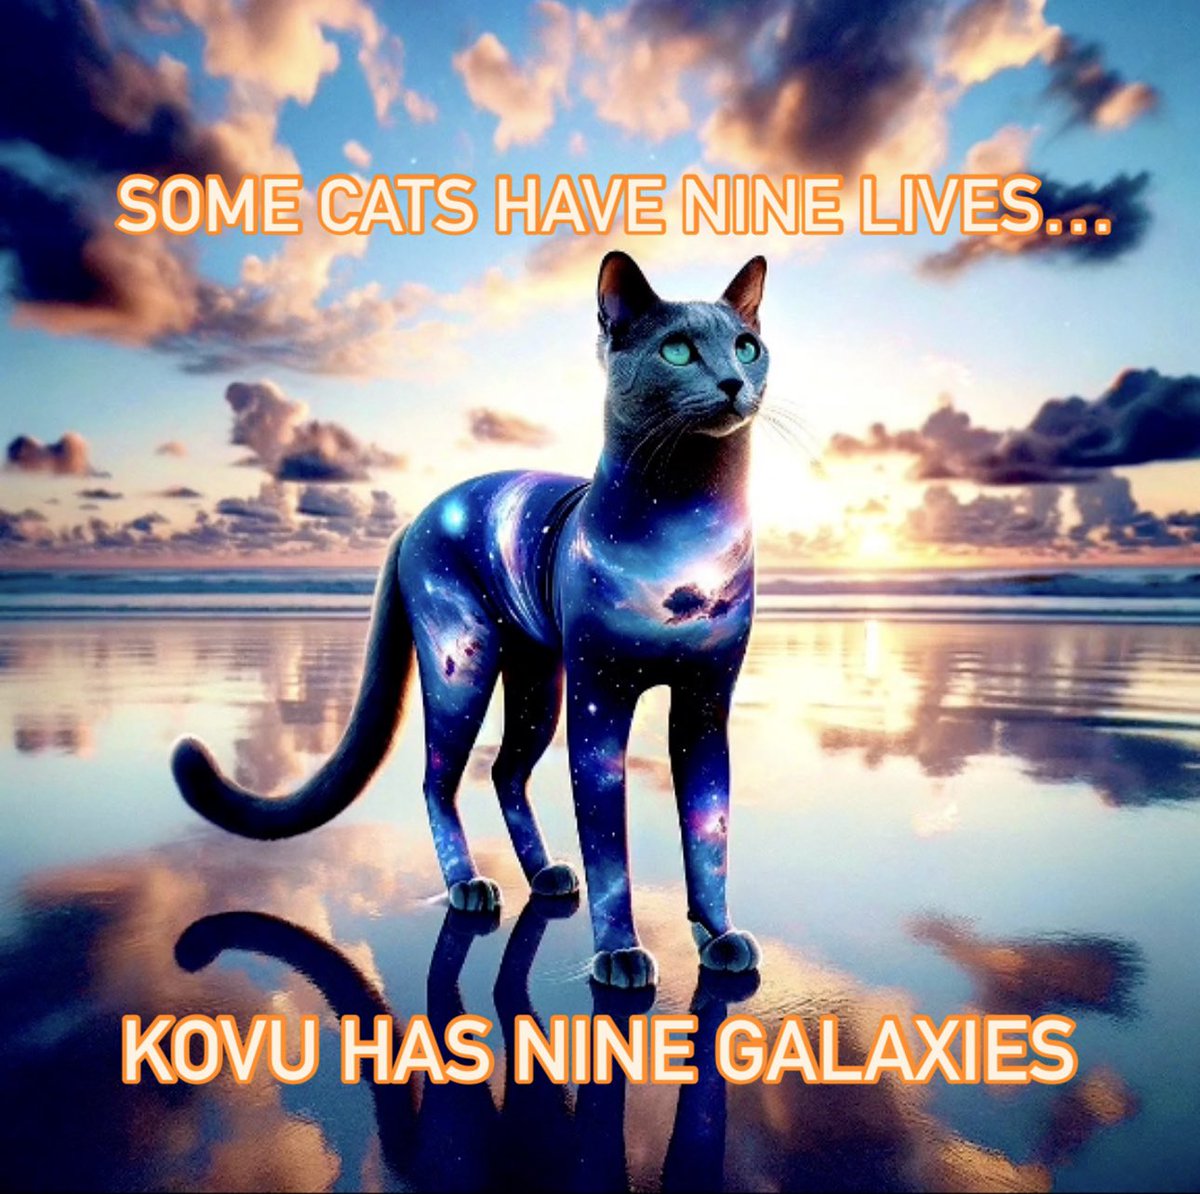 Some cats have nine lives… but Kovu reigns over nine galaxies. 🌌🐾 #CosmicCat #GalacticPaws #CatsofTheUniverse #cats #CatsOfTwitter #Caturday #GoldenDiscAwards2024 #AIarmy #AIArtwork #Jan6th #beach #galaxy #meme #funny #memes #memesdaily #memeseason #MemeContest